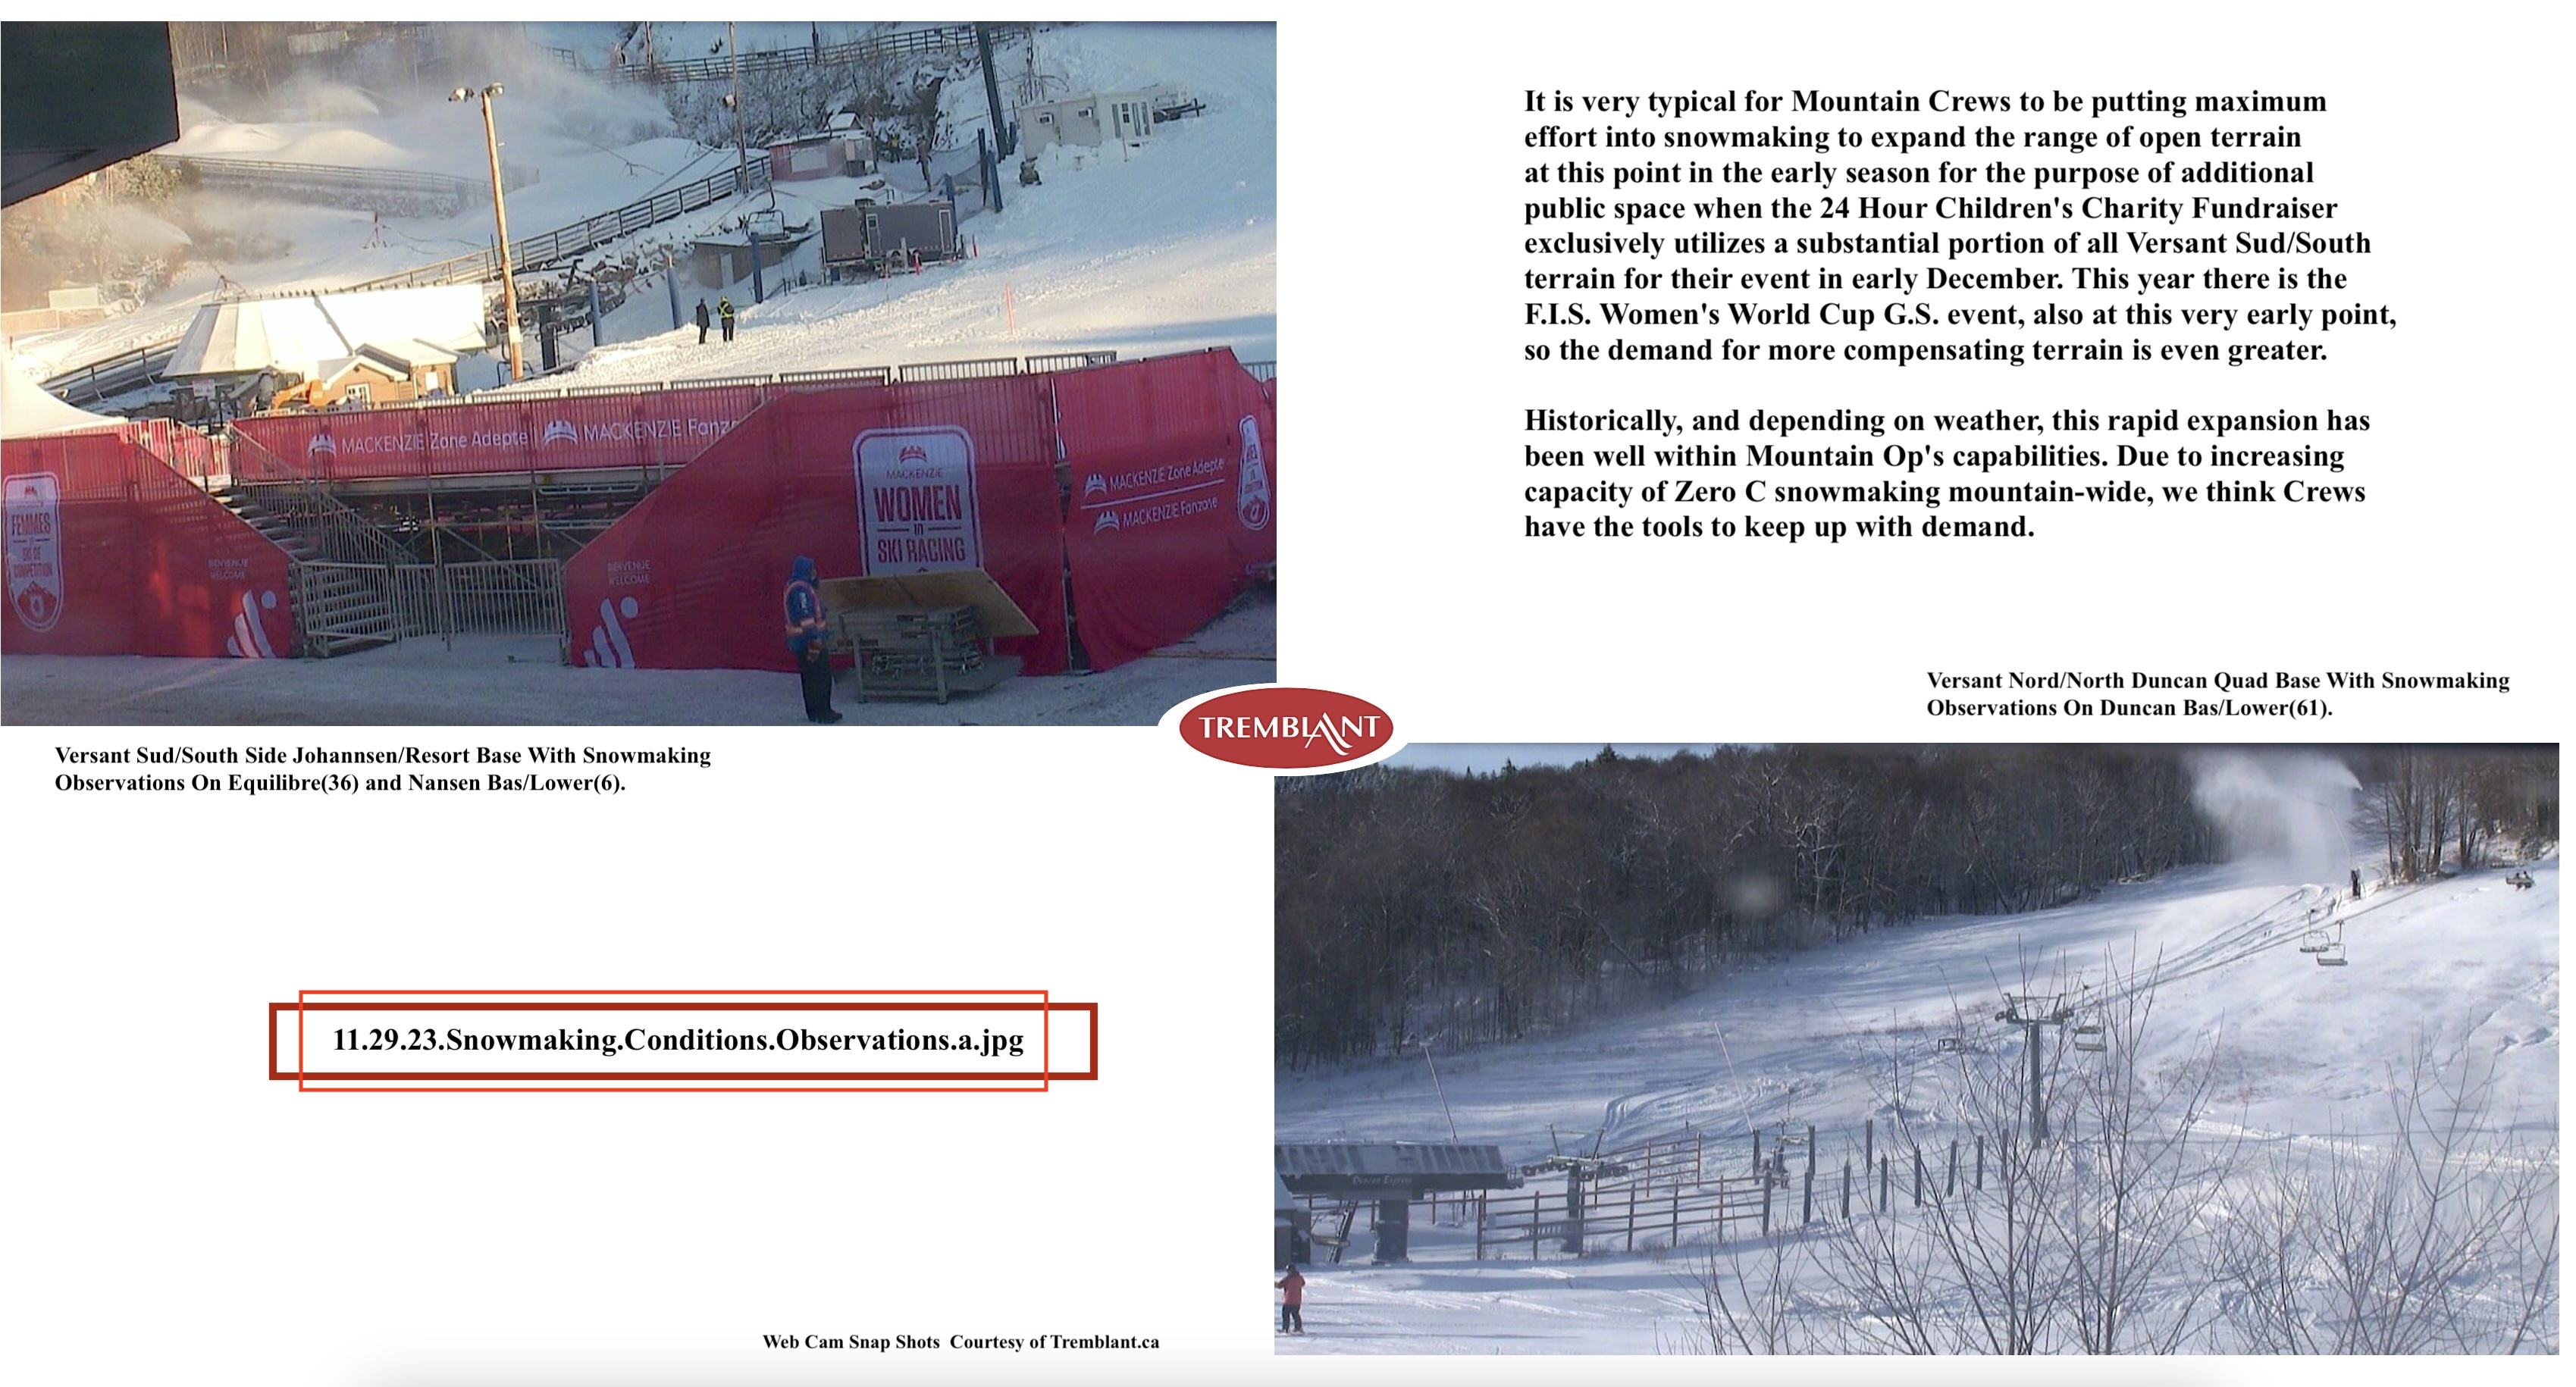 11.29.23.Snowmaking.Conditions.Observations.a.jpg